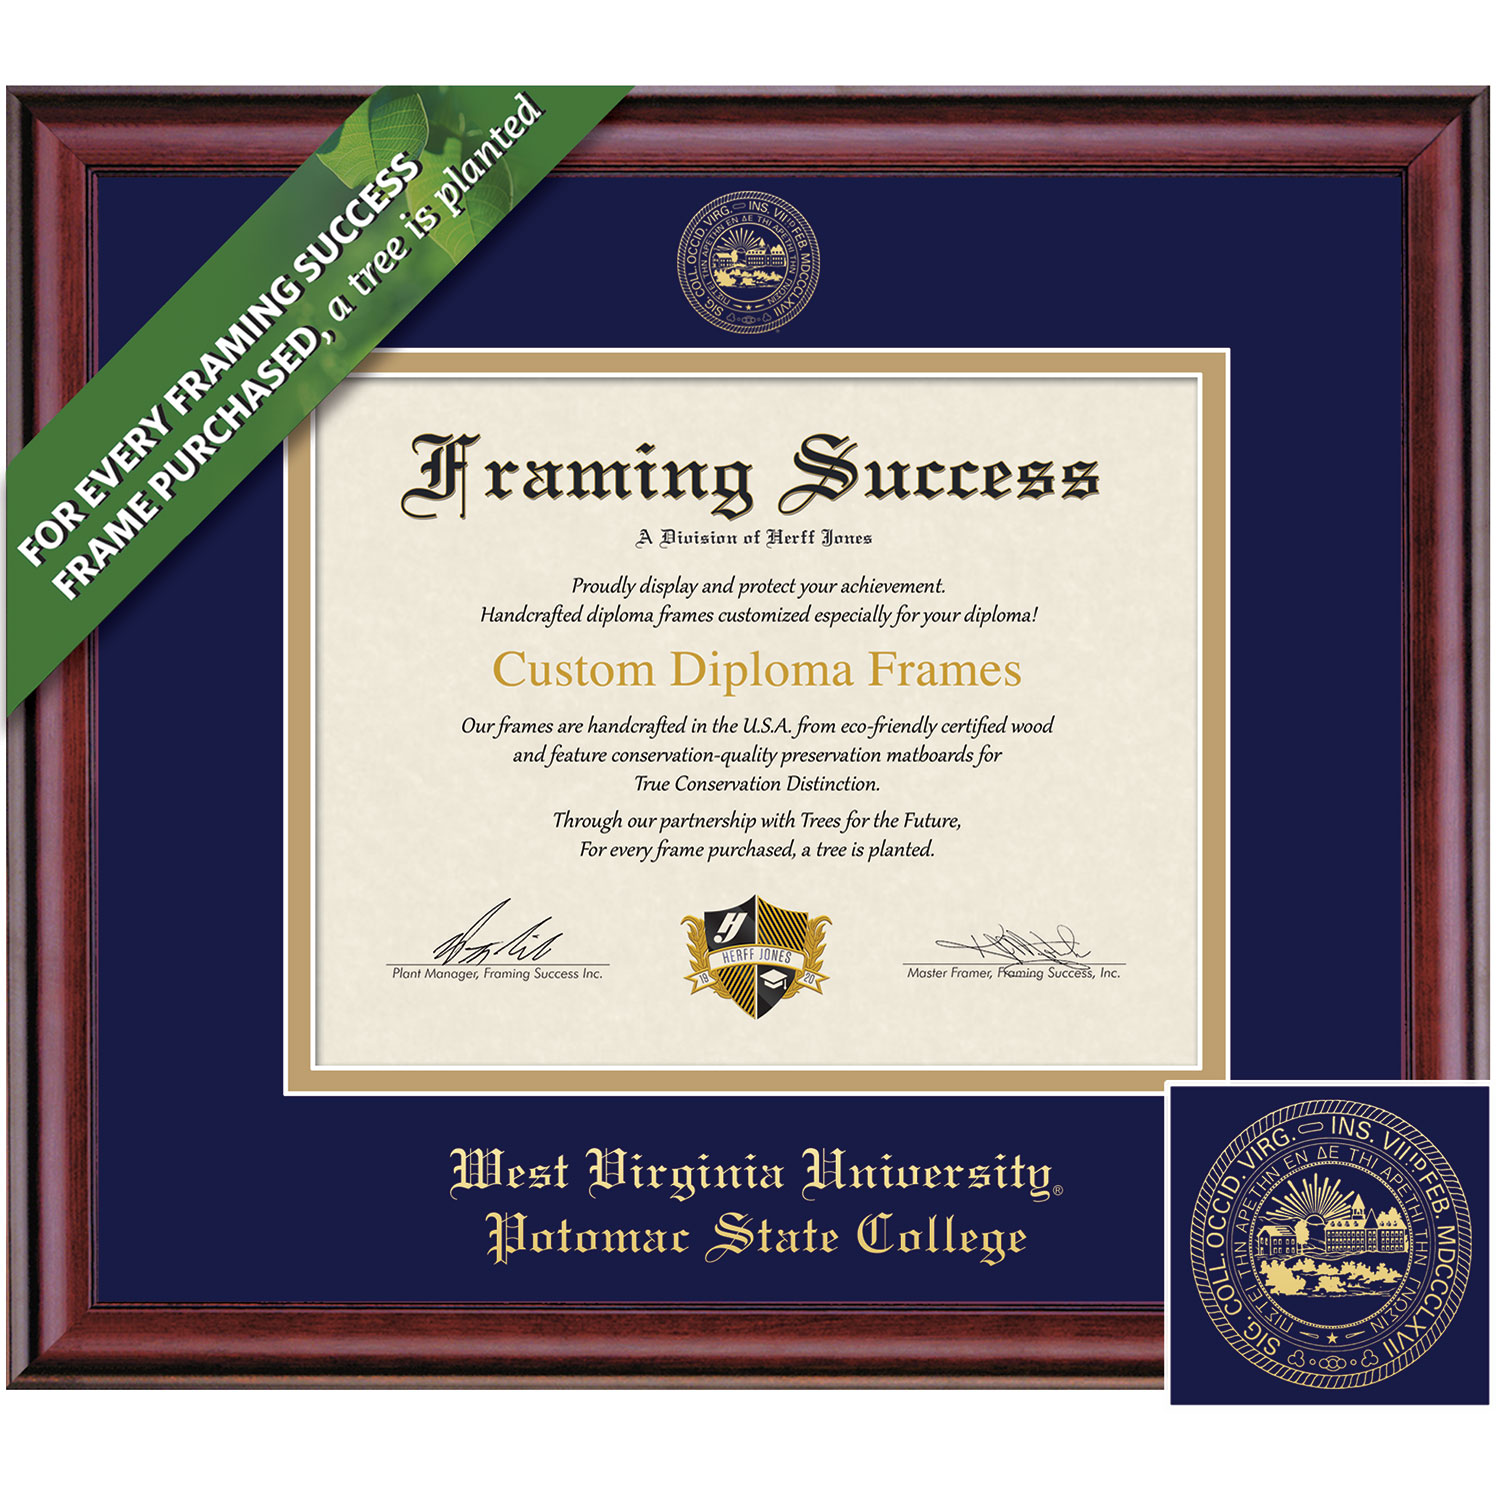 Framing Success 7 x 9 Classic Gold Embossed School Seal Bachelors, Masters Diploma Frame